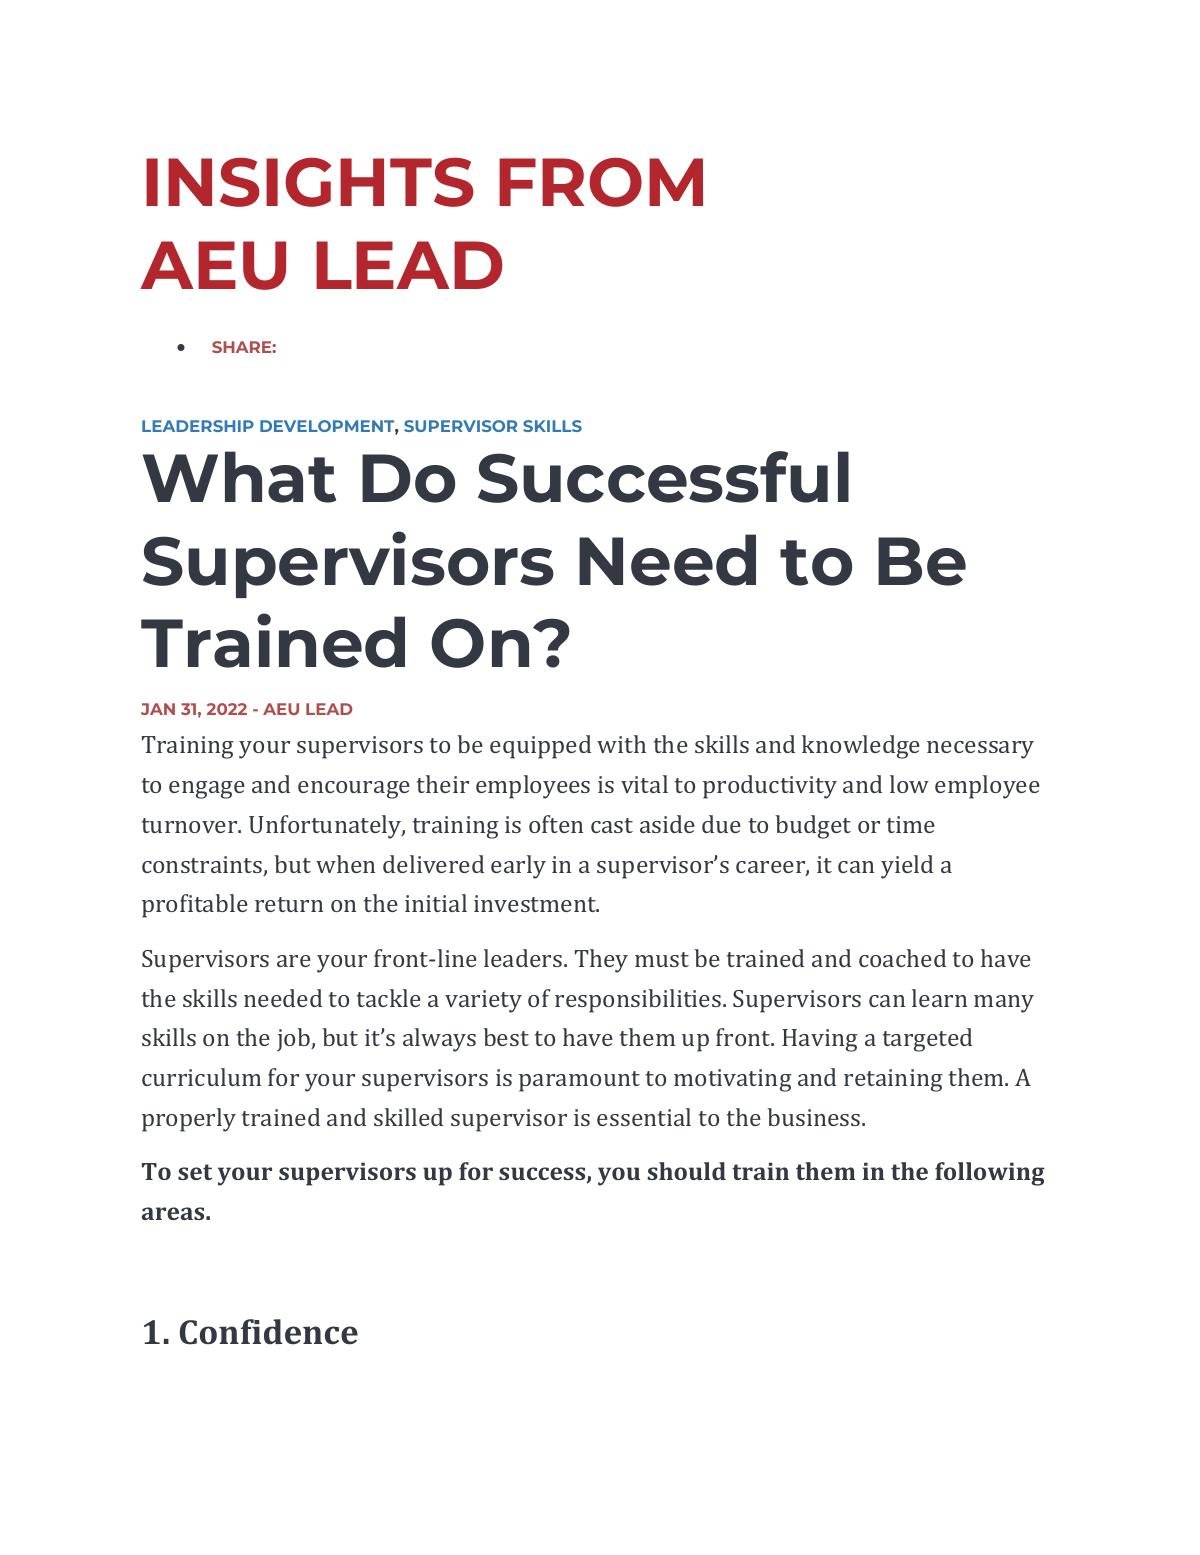 What Do Successful Supervisors Need to Be Trained On?